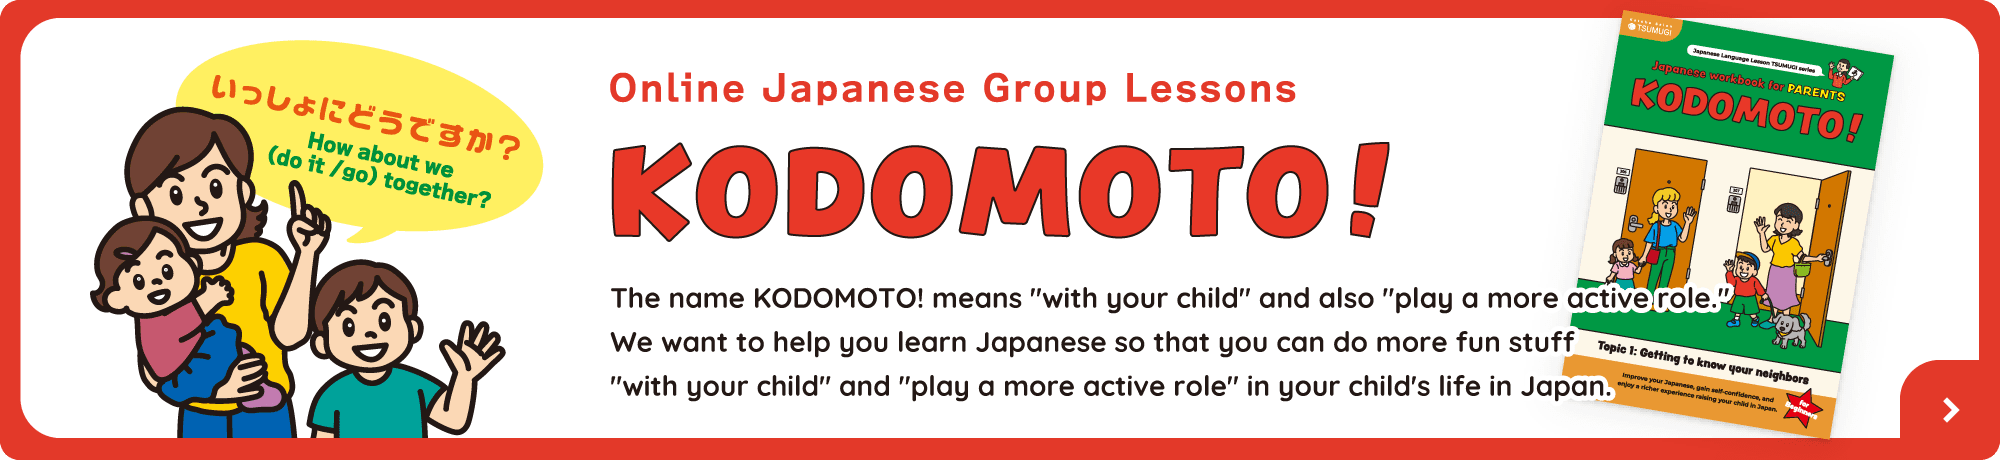 Online Japanese Group Lessons KODOMOTO!